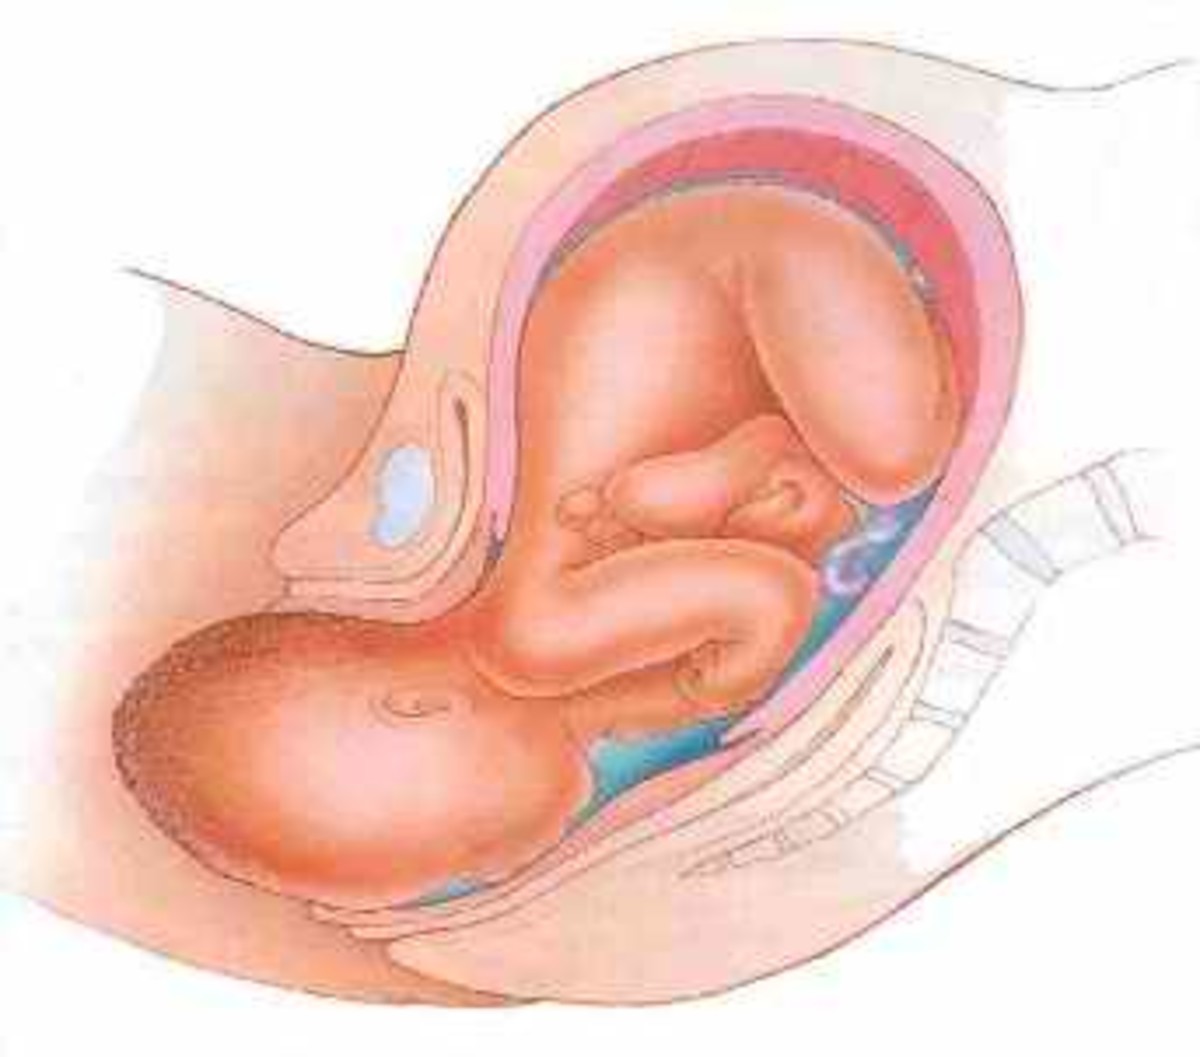 The transition phase of the stages of labor is normally the hardest phase to have to go through.  This picture shows the end of the transition phase of stage 1 and the beginning of stage 2 (birth of the baby).